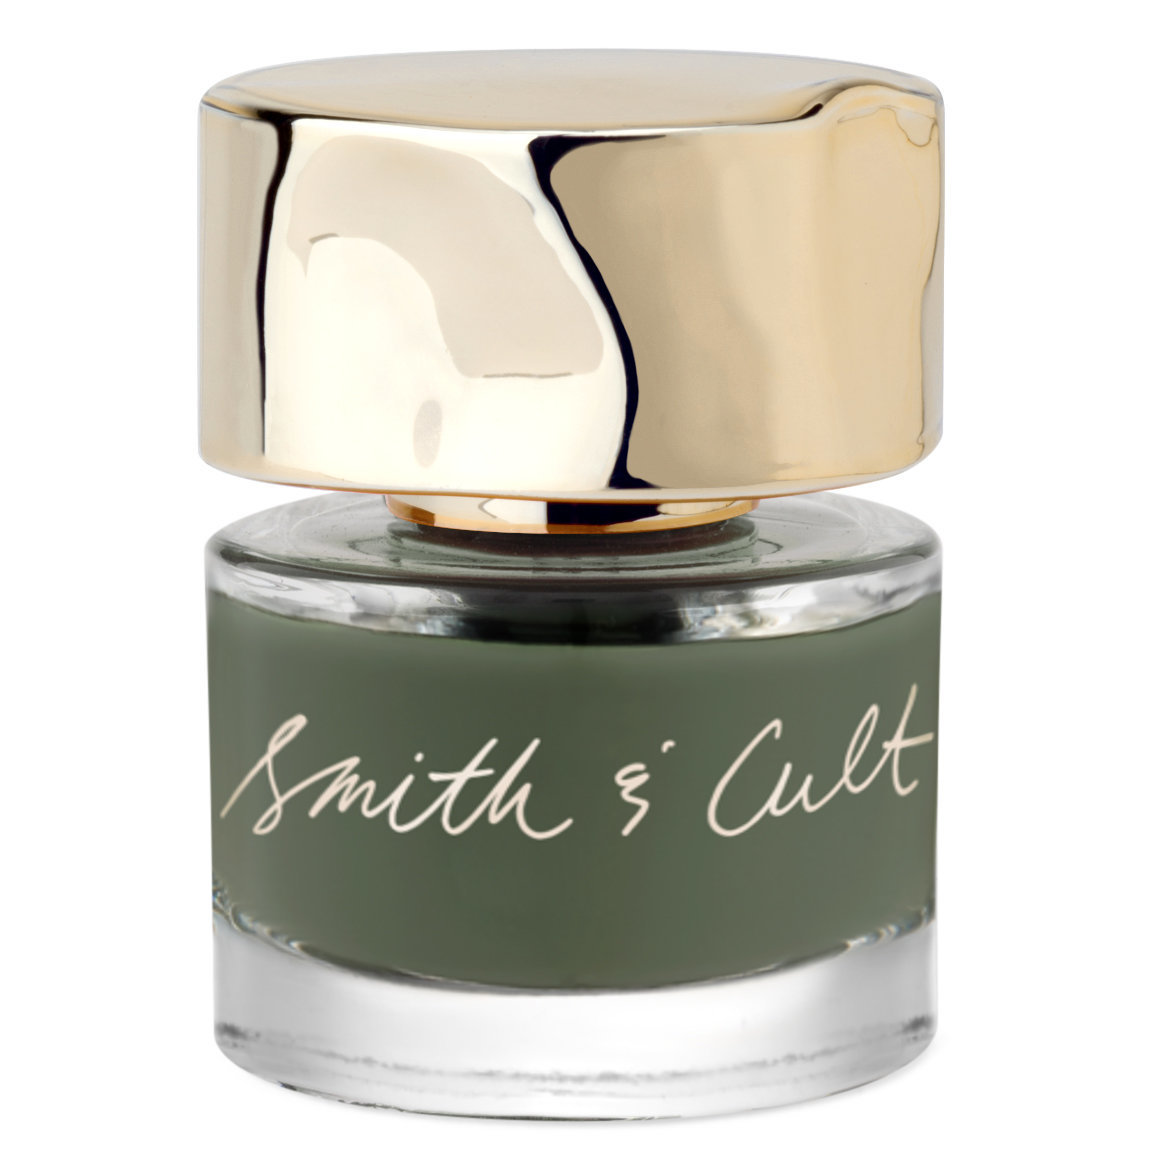 Smith & Cult Nailed Lacquer Stranded Stranger alternative view 1.